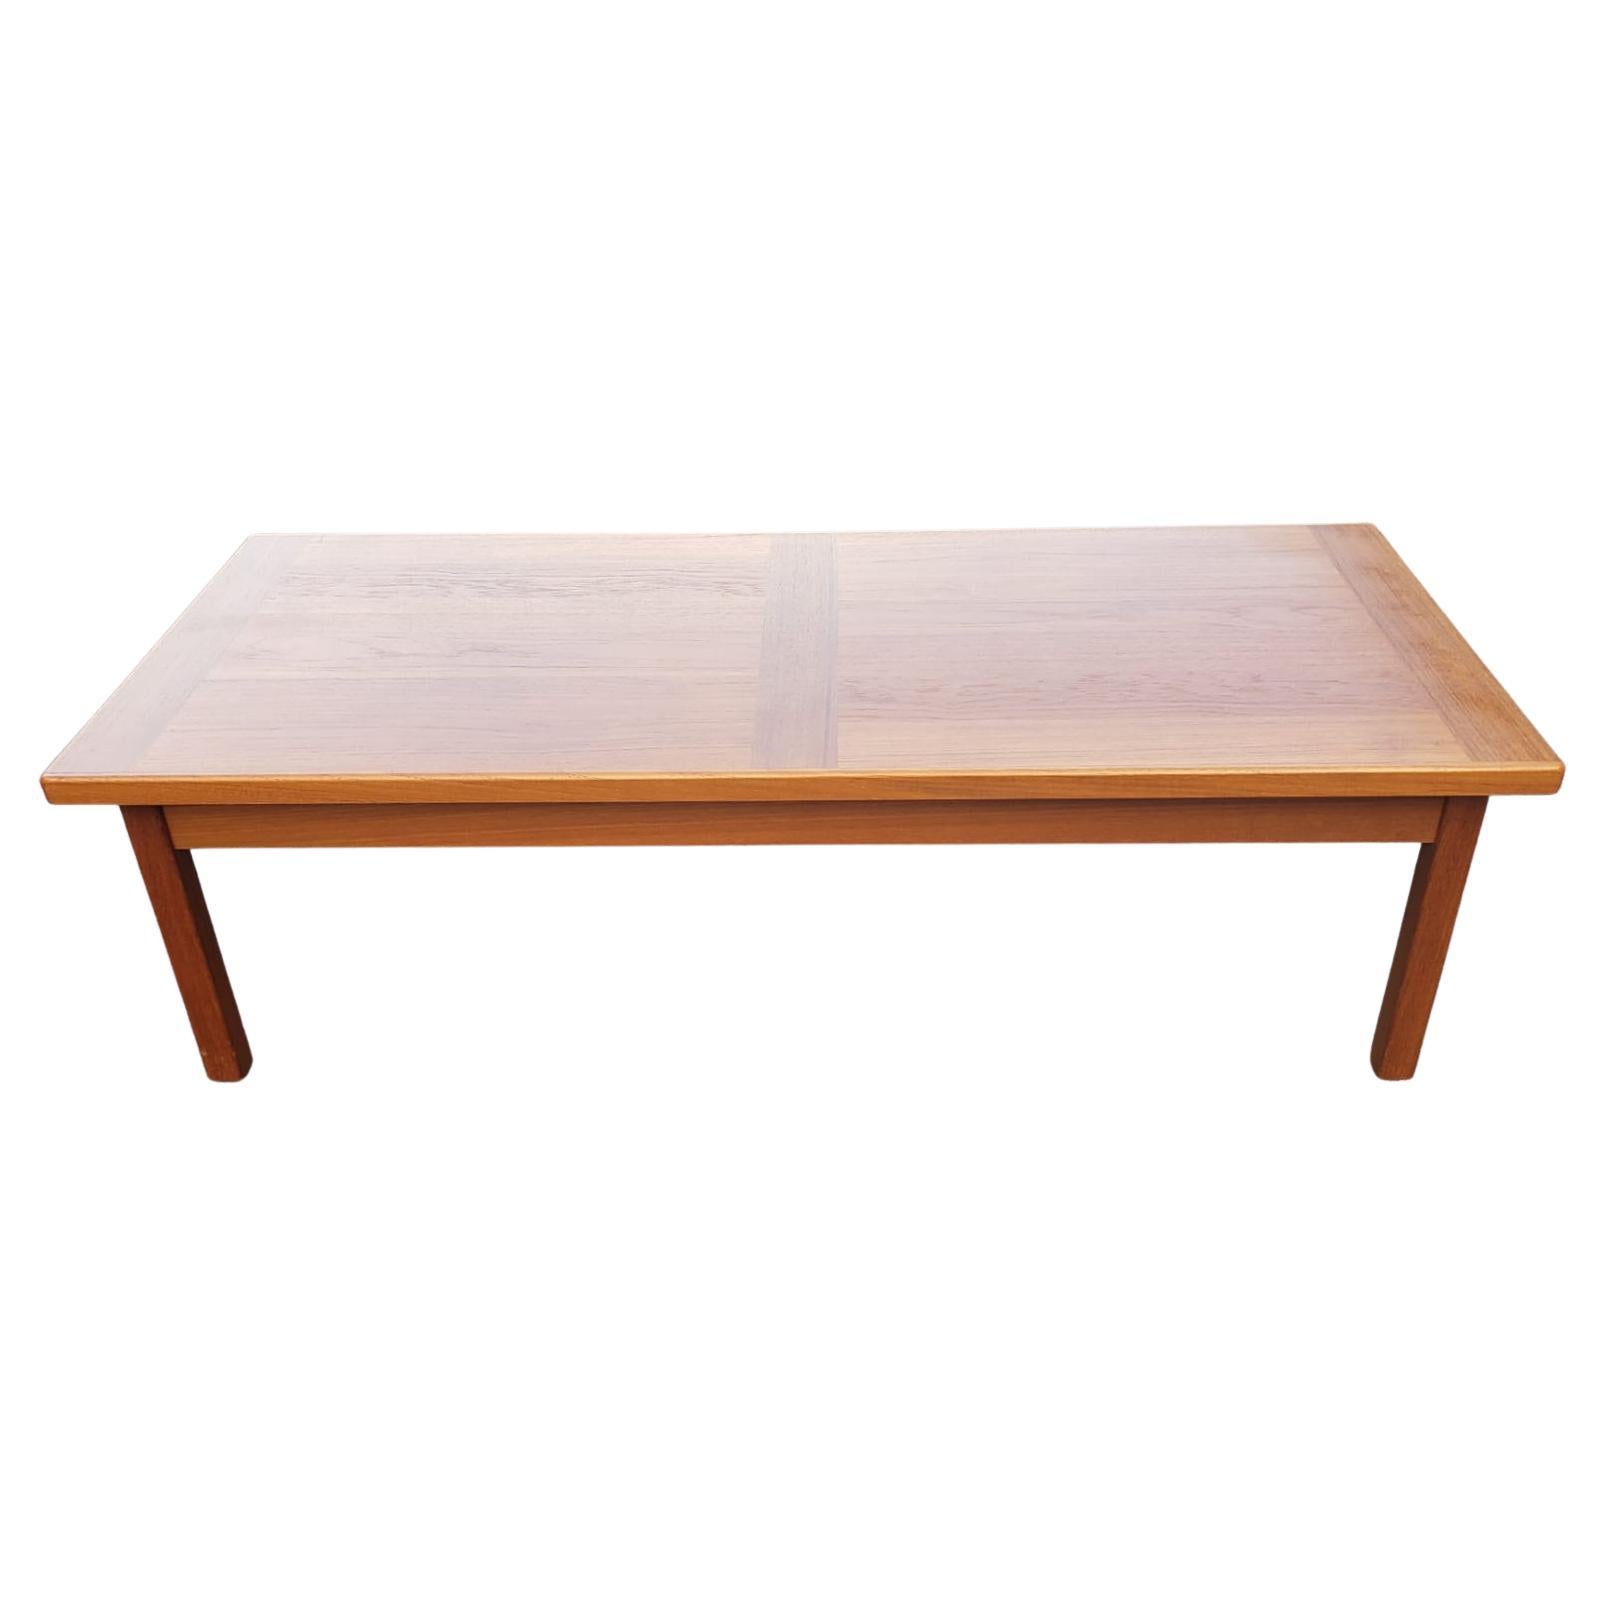 Danish Modern Solid Teak Coktail Table / Coffee Table For Sale